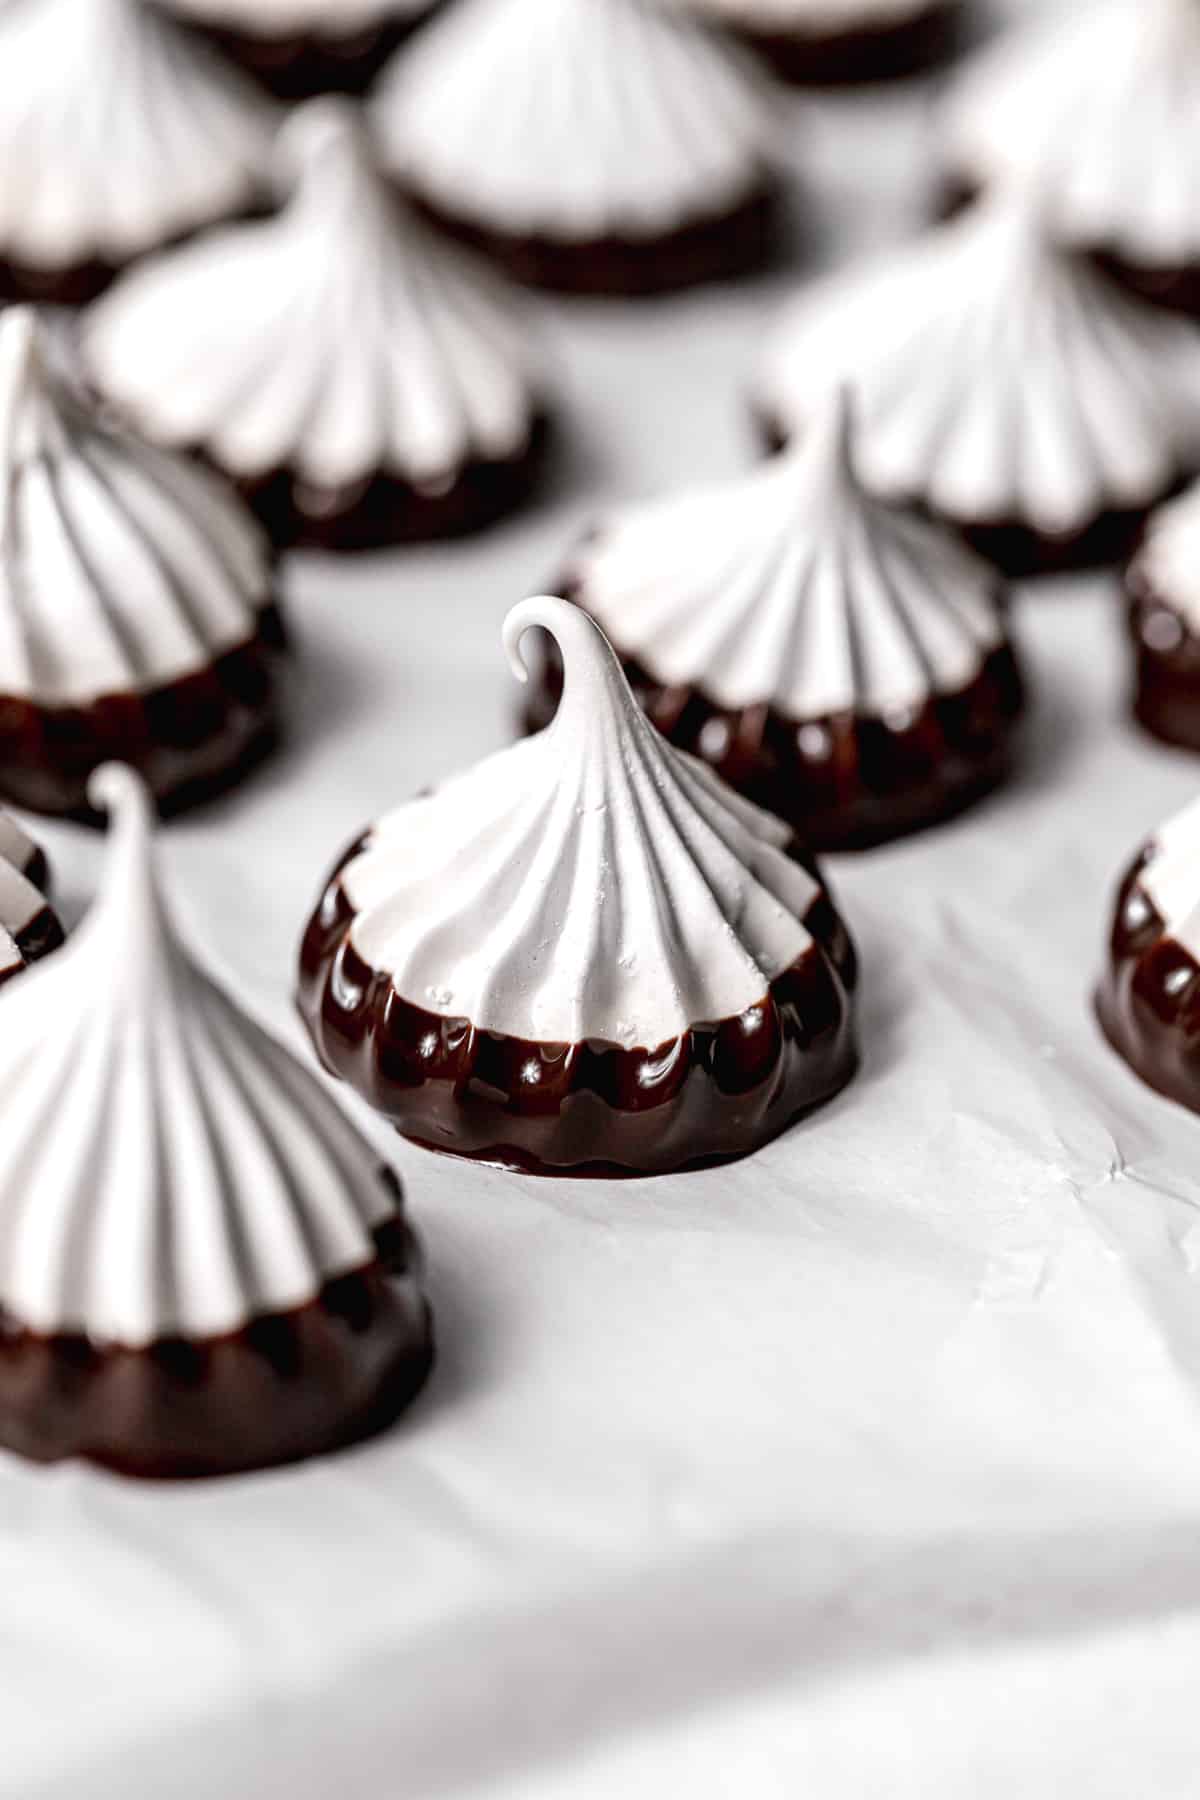 meringue cookies dipped in chocolate on parchment paper